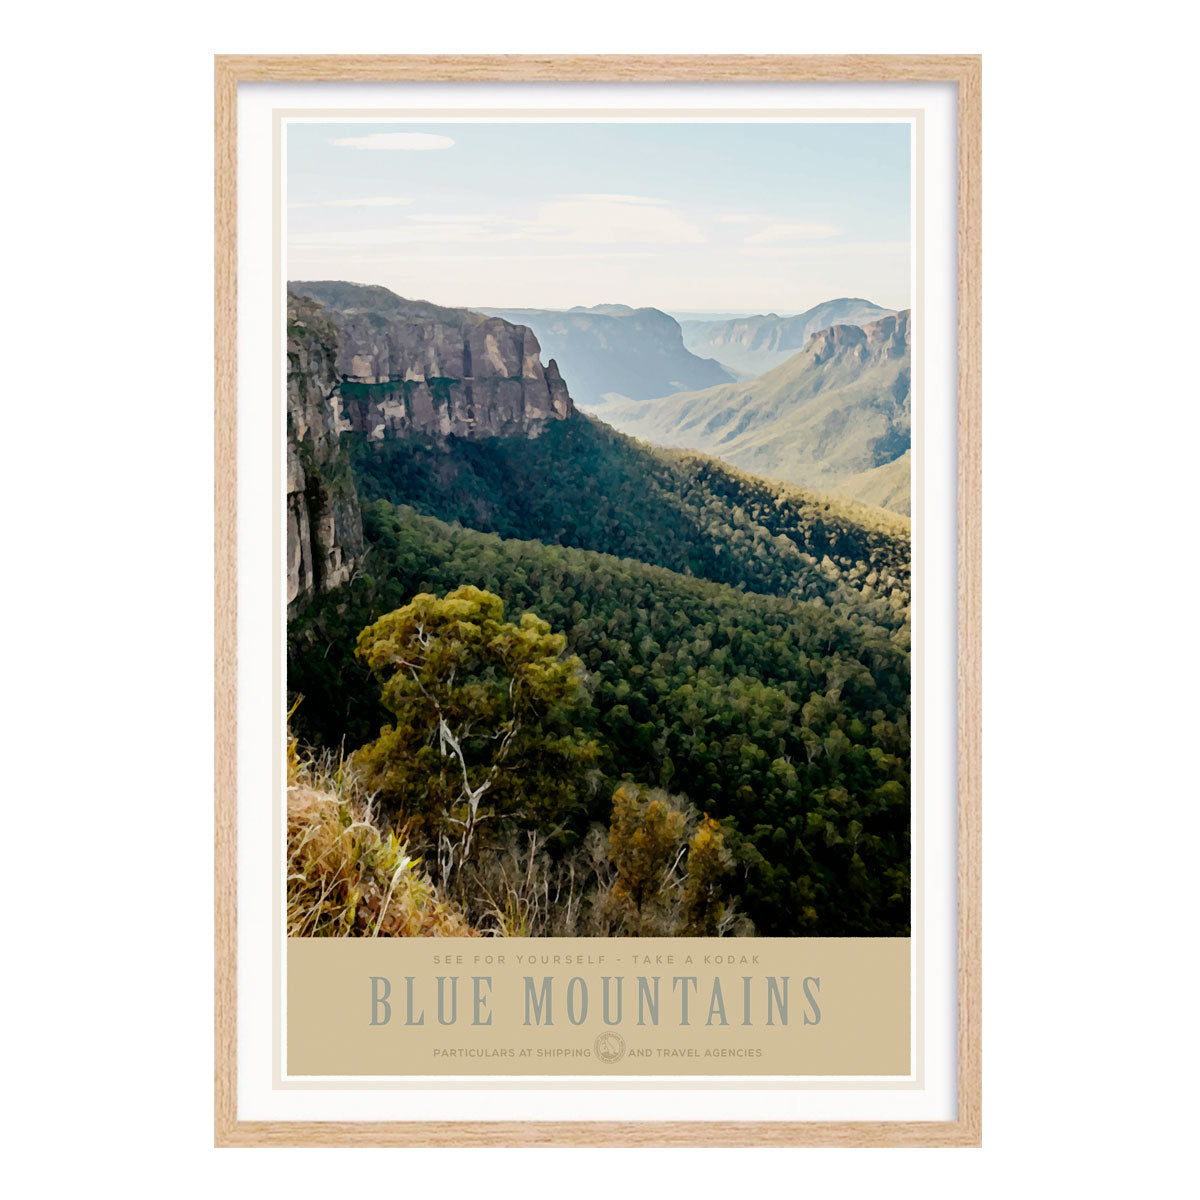 Blue Mountains retro vintage poster in oak frame from Places We Luv